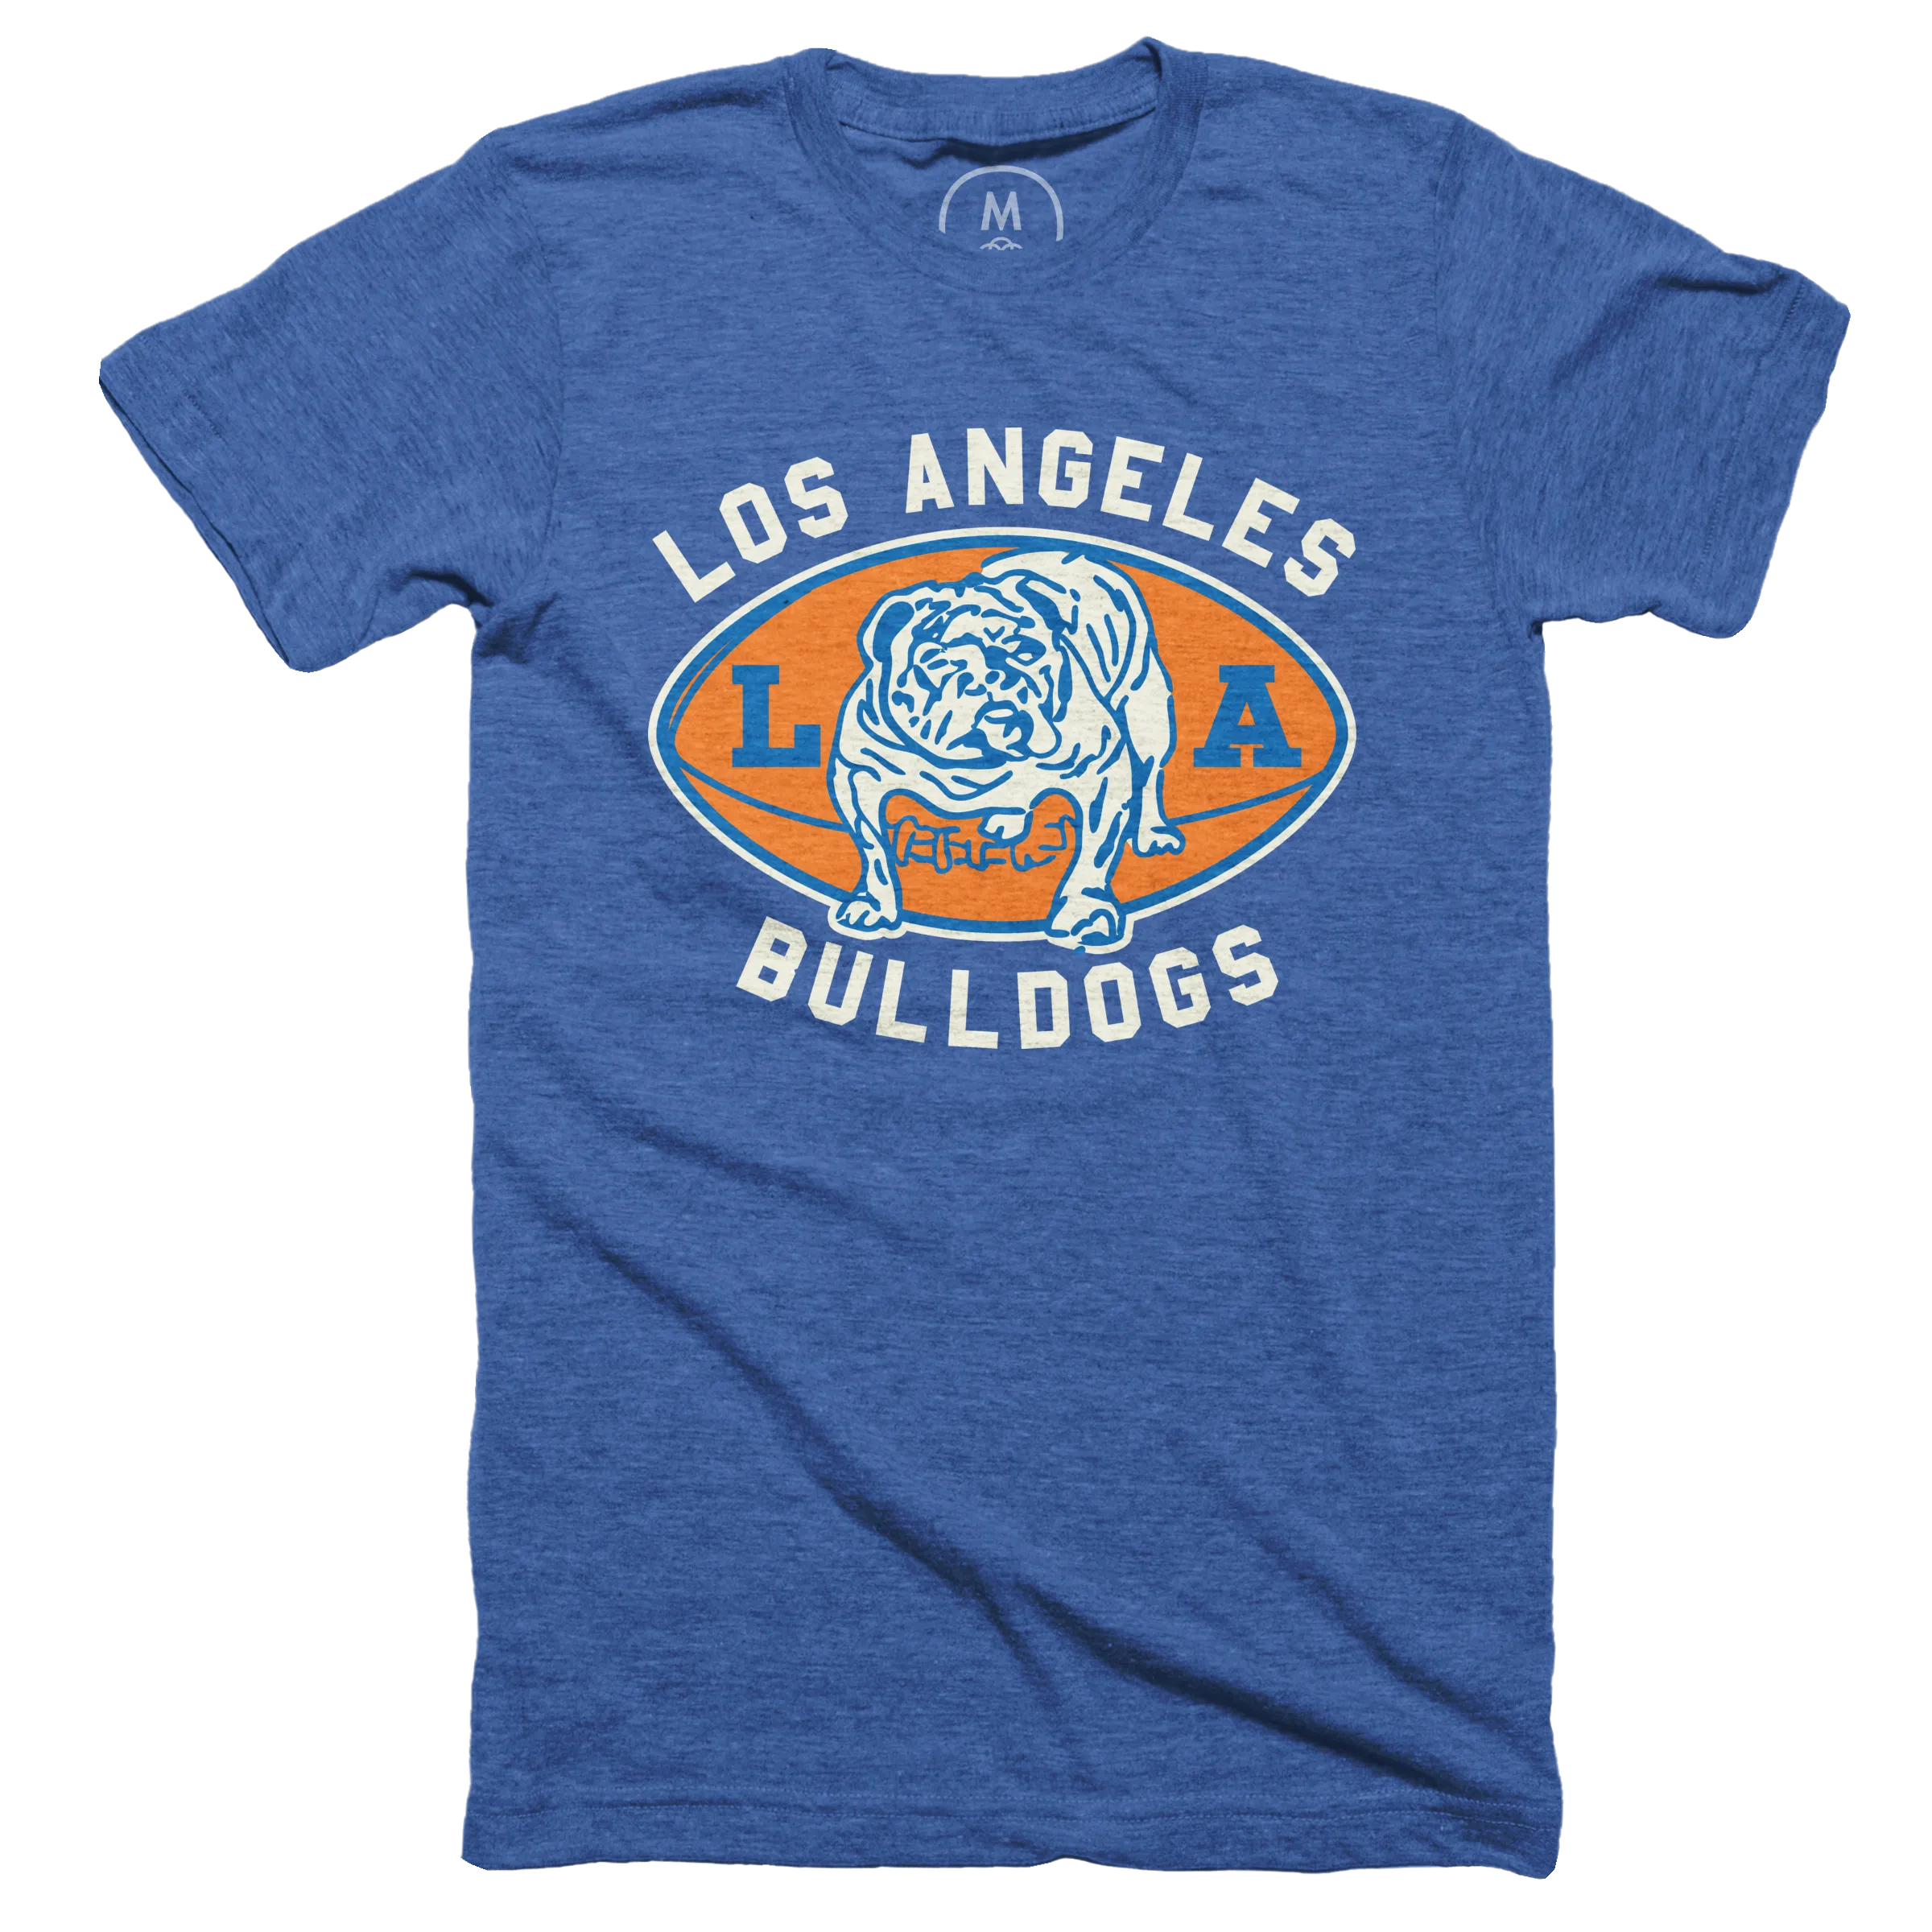 Los Angeles Bulldogs” graphic tee, pullover hoodie, and tank by 59 Apparel.